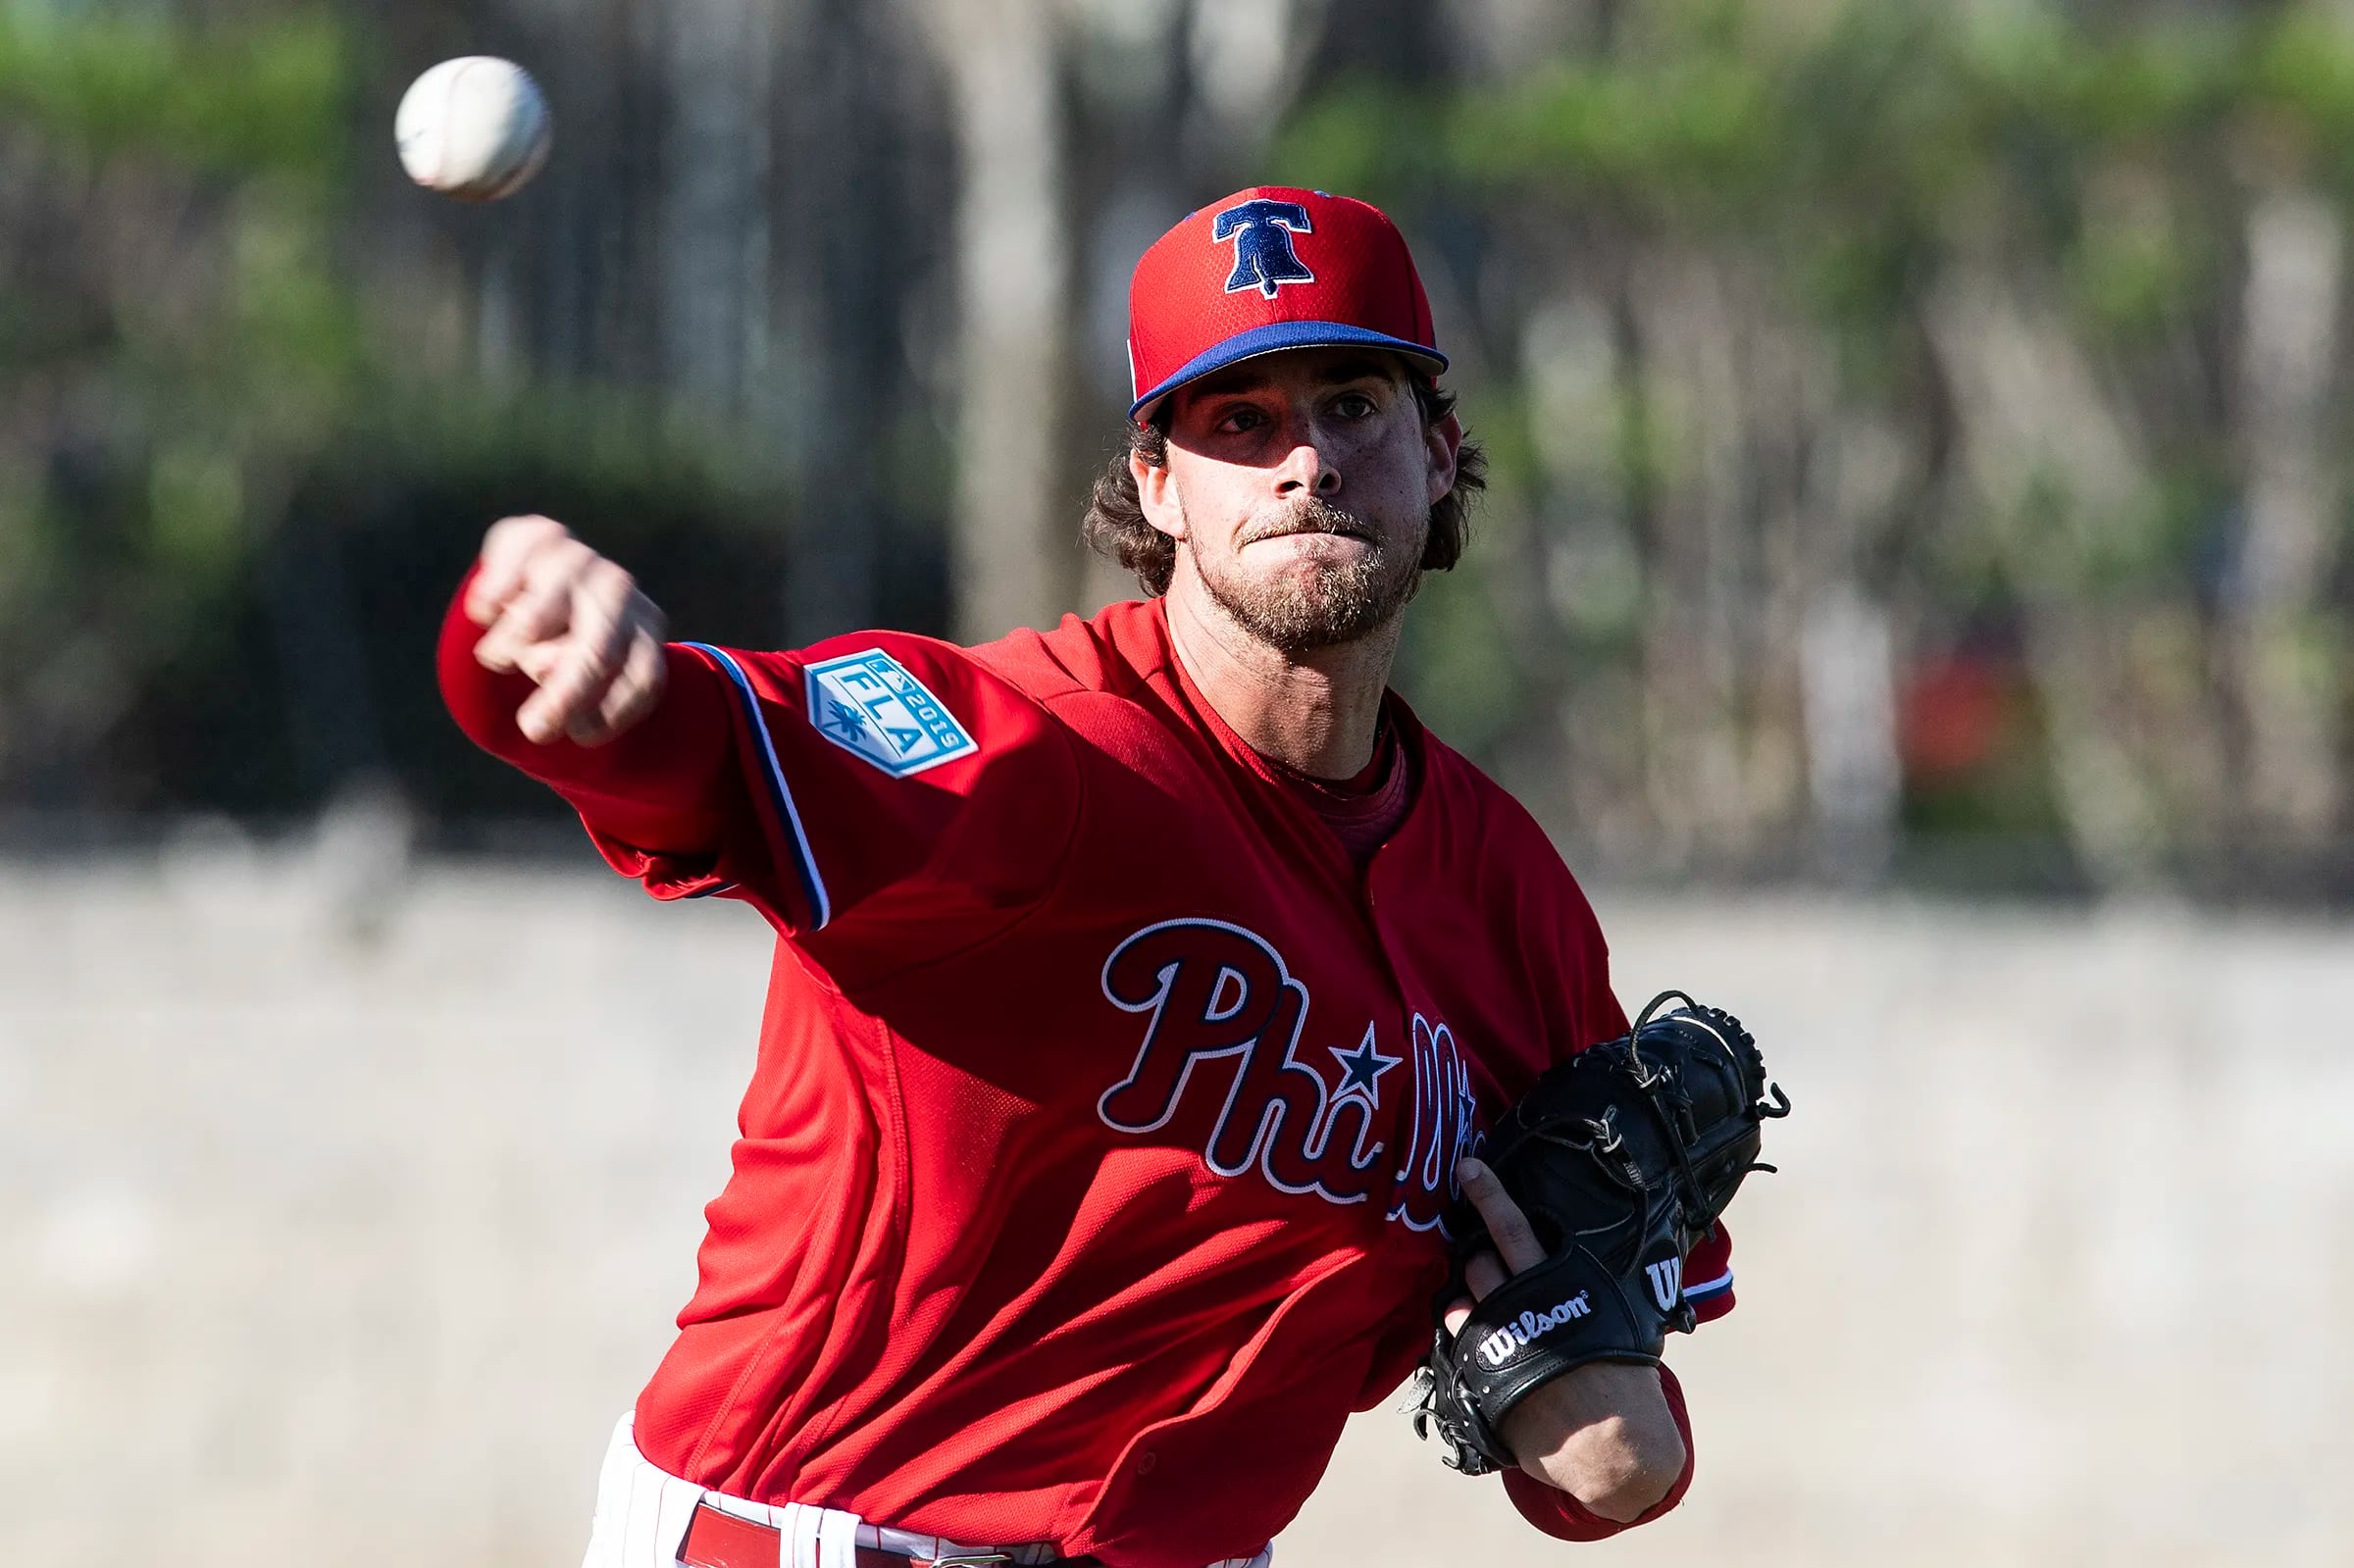 Trying to 'soak it in as much as possible,' Aaron Nola delivers